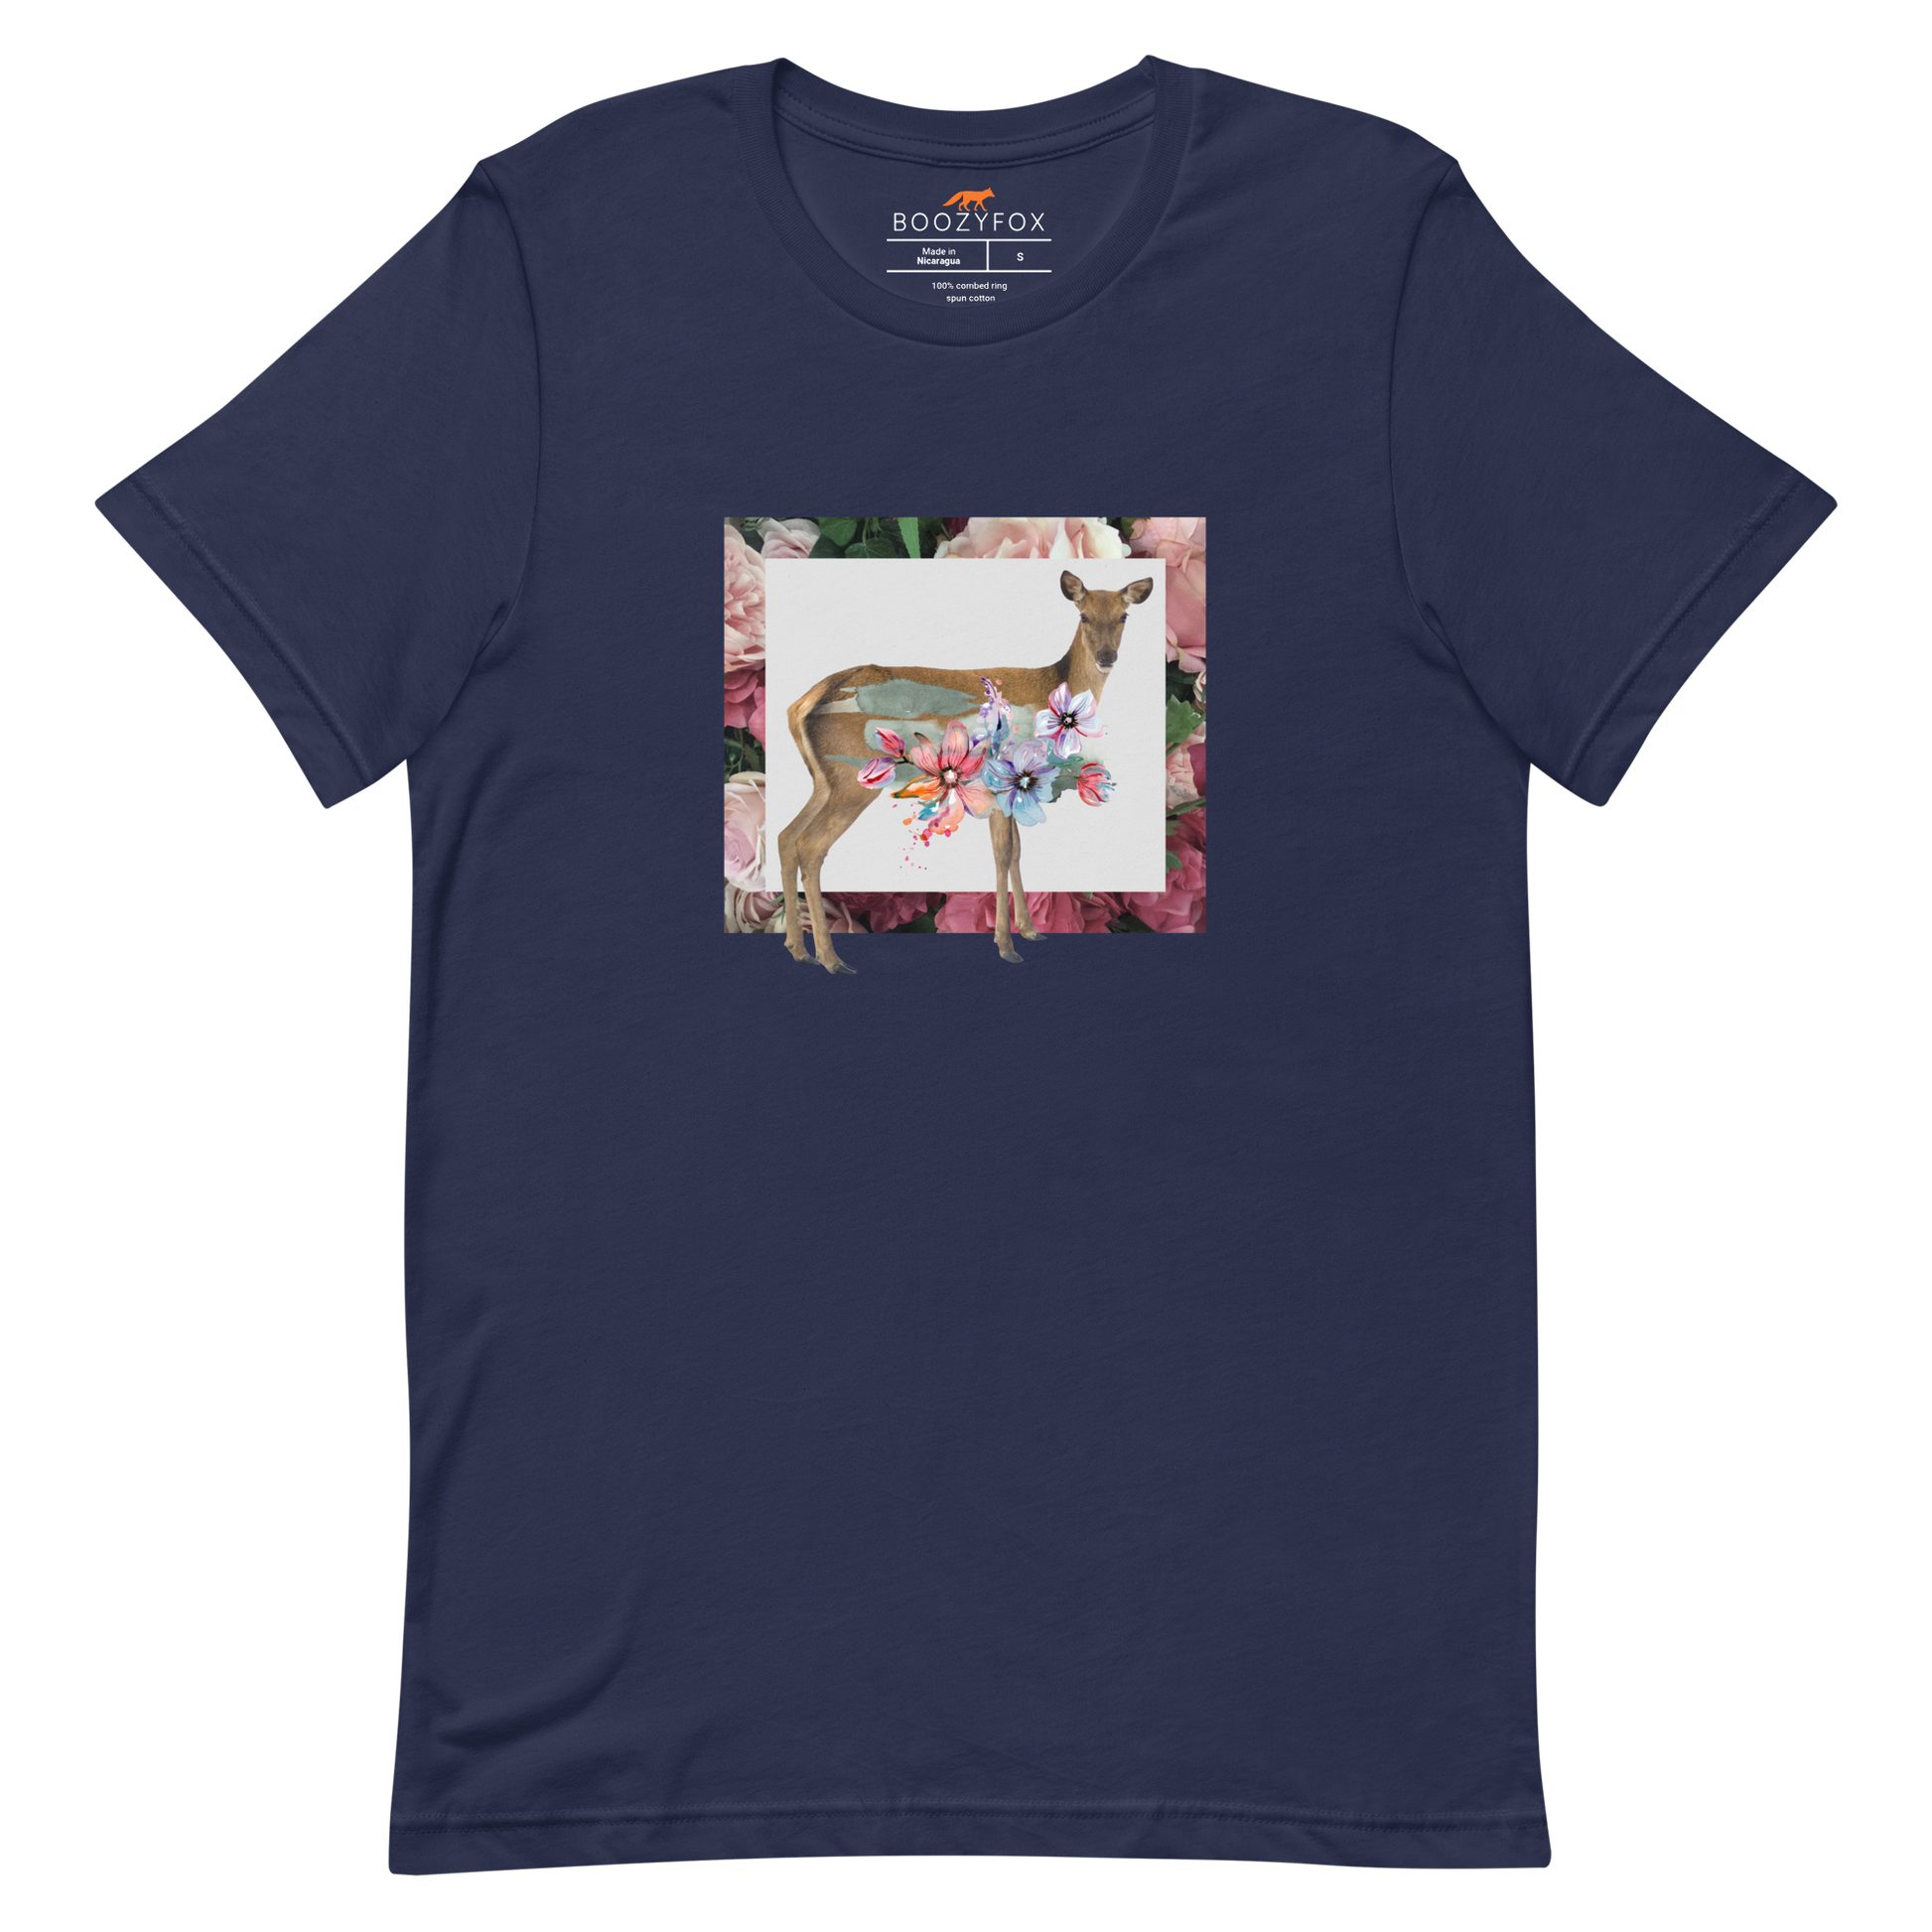 Navy Premium Deer T-Shirt featuring a stunning Floral Deer graphic on the chest - Cute Graphic Deer Tees - Boozy Fox